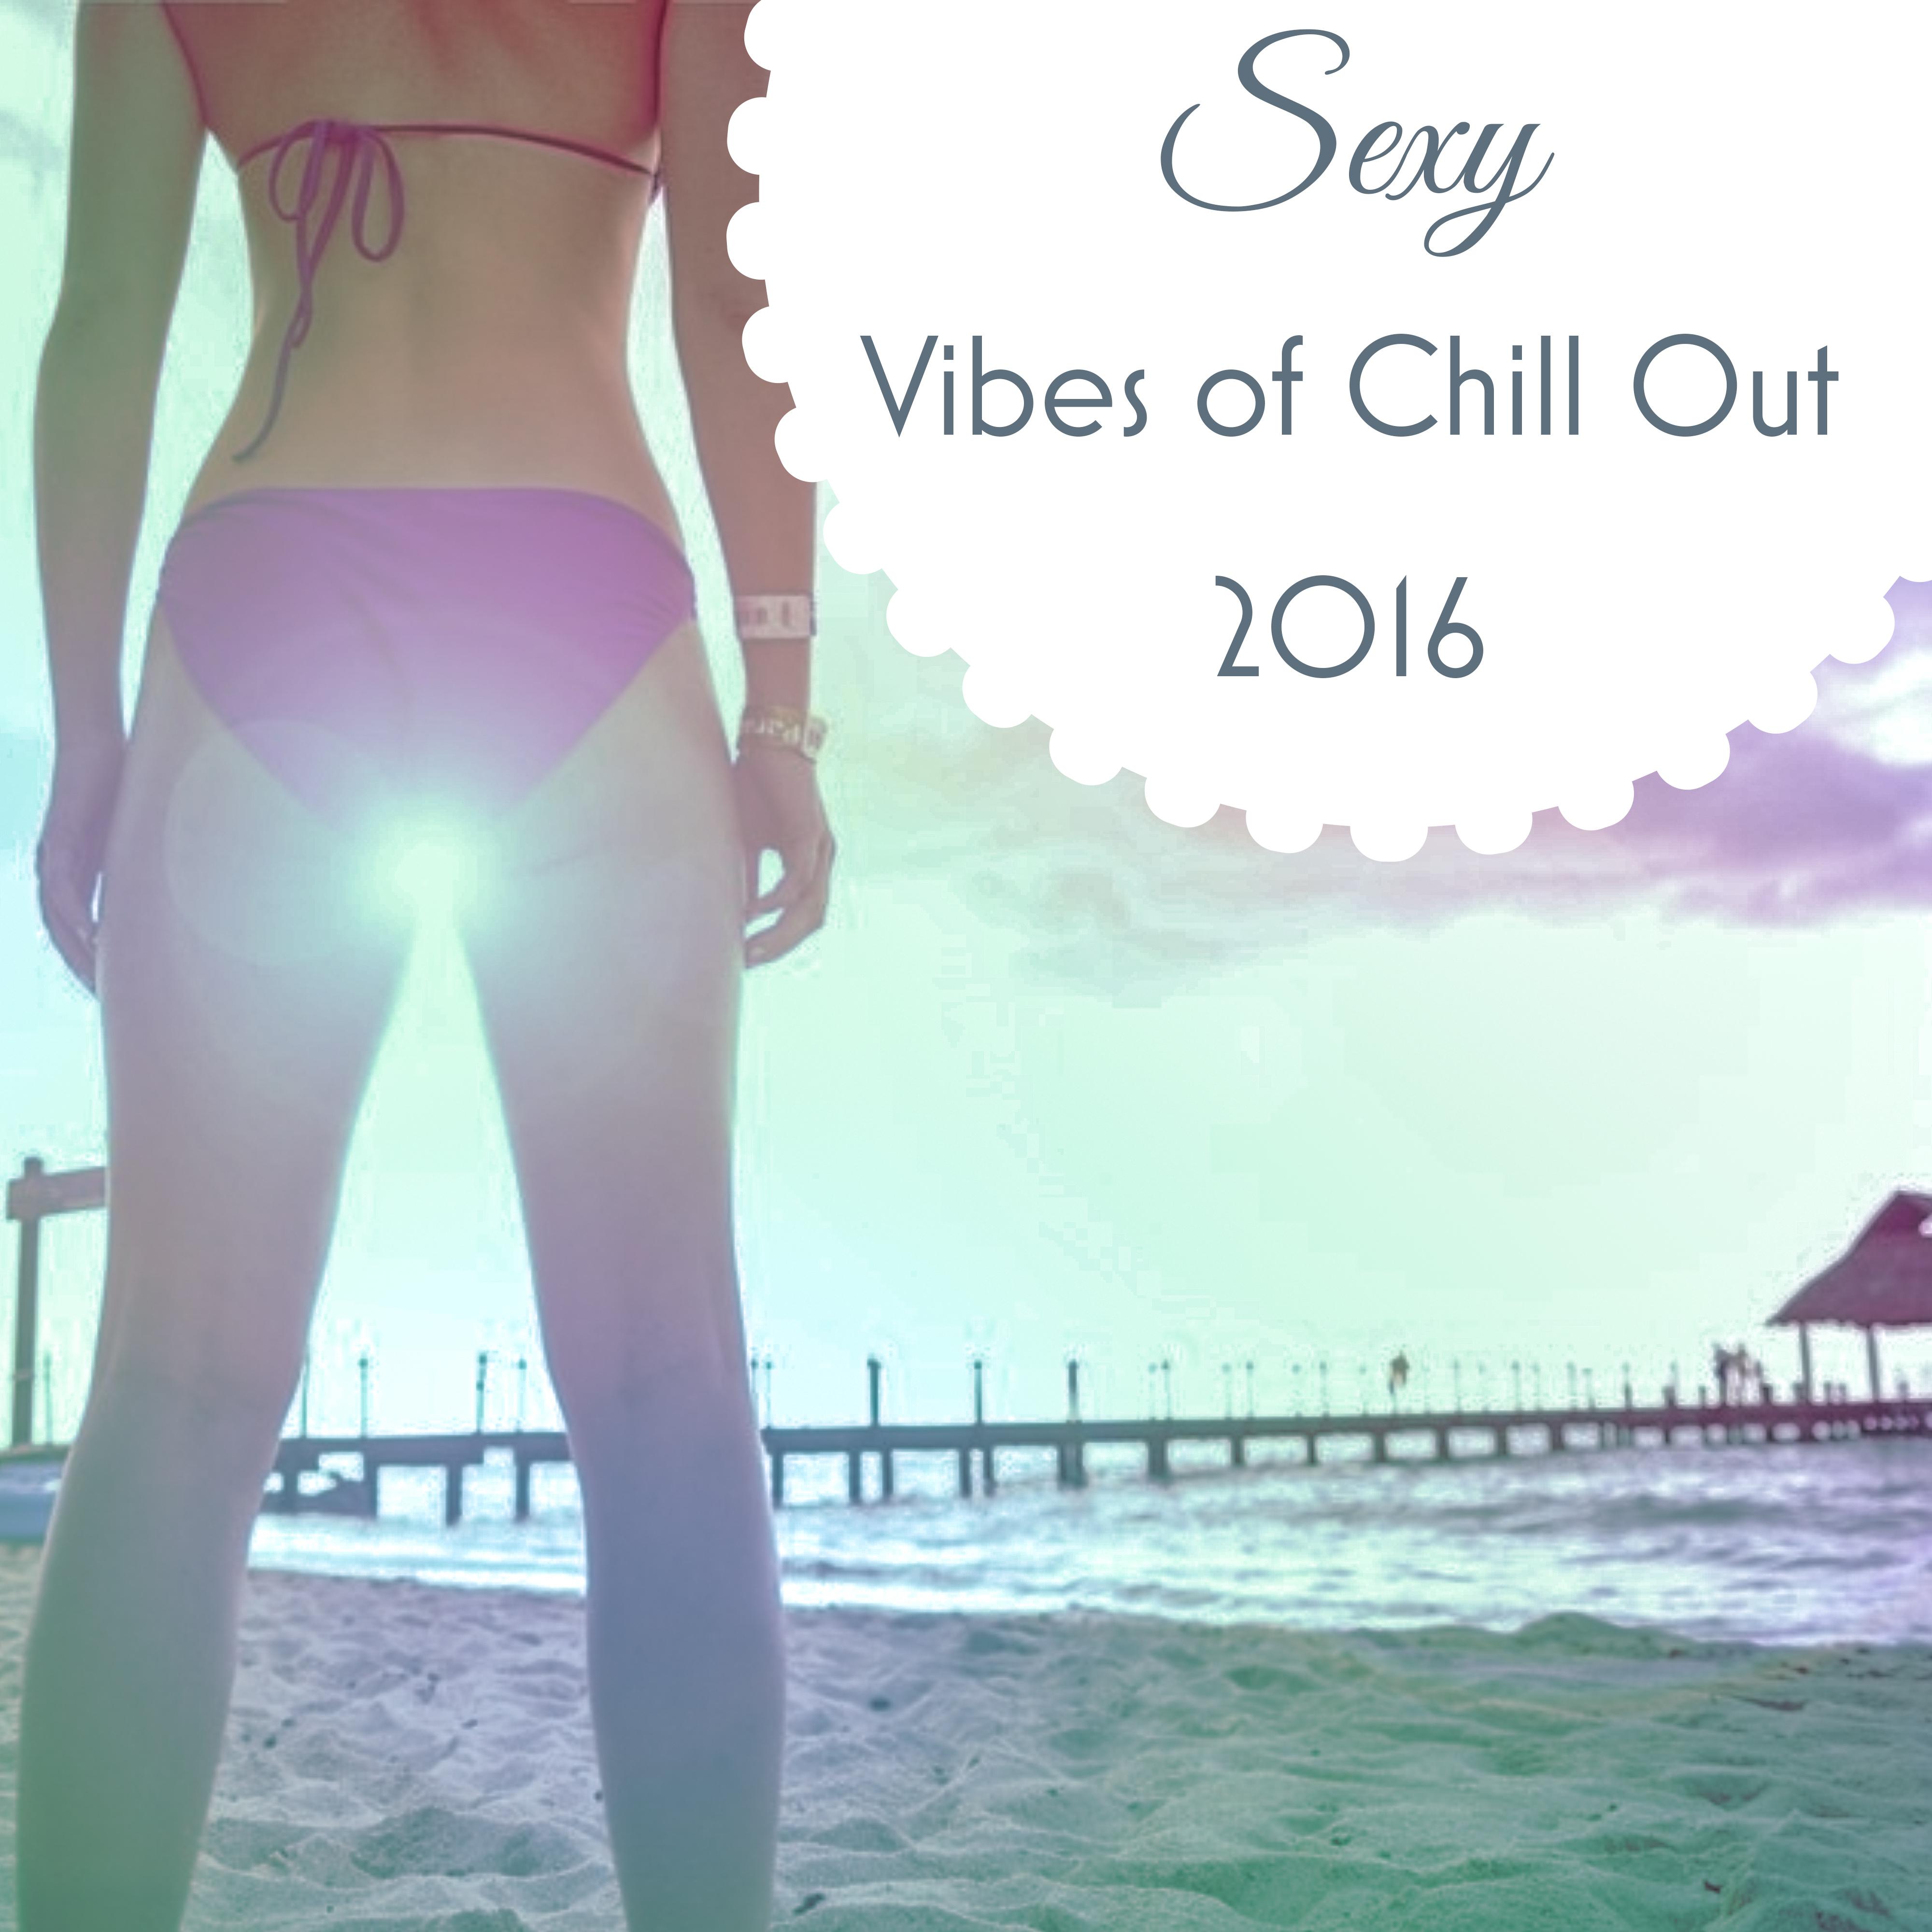 **** Vibes of Chill Out 2016 - The Best Chillout Ever, **** Summer Lounge, Chill Out, Beach Party, **** Music, Summer Solstice